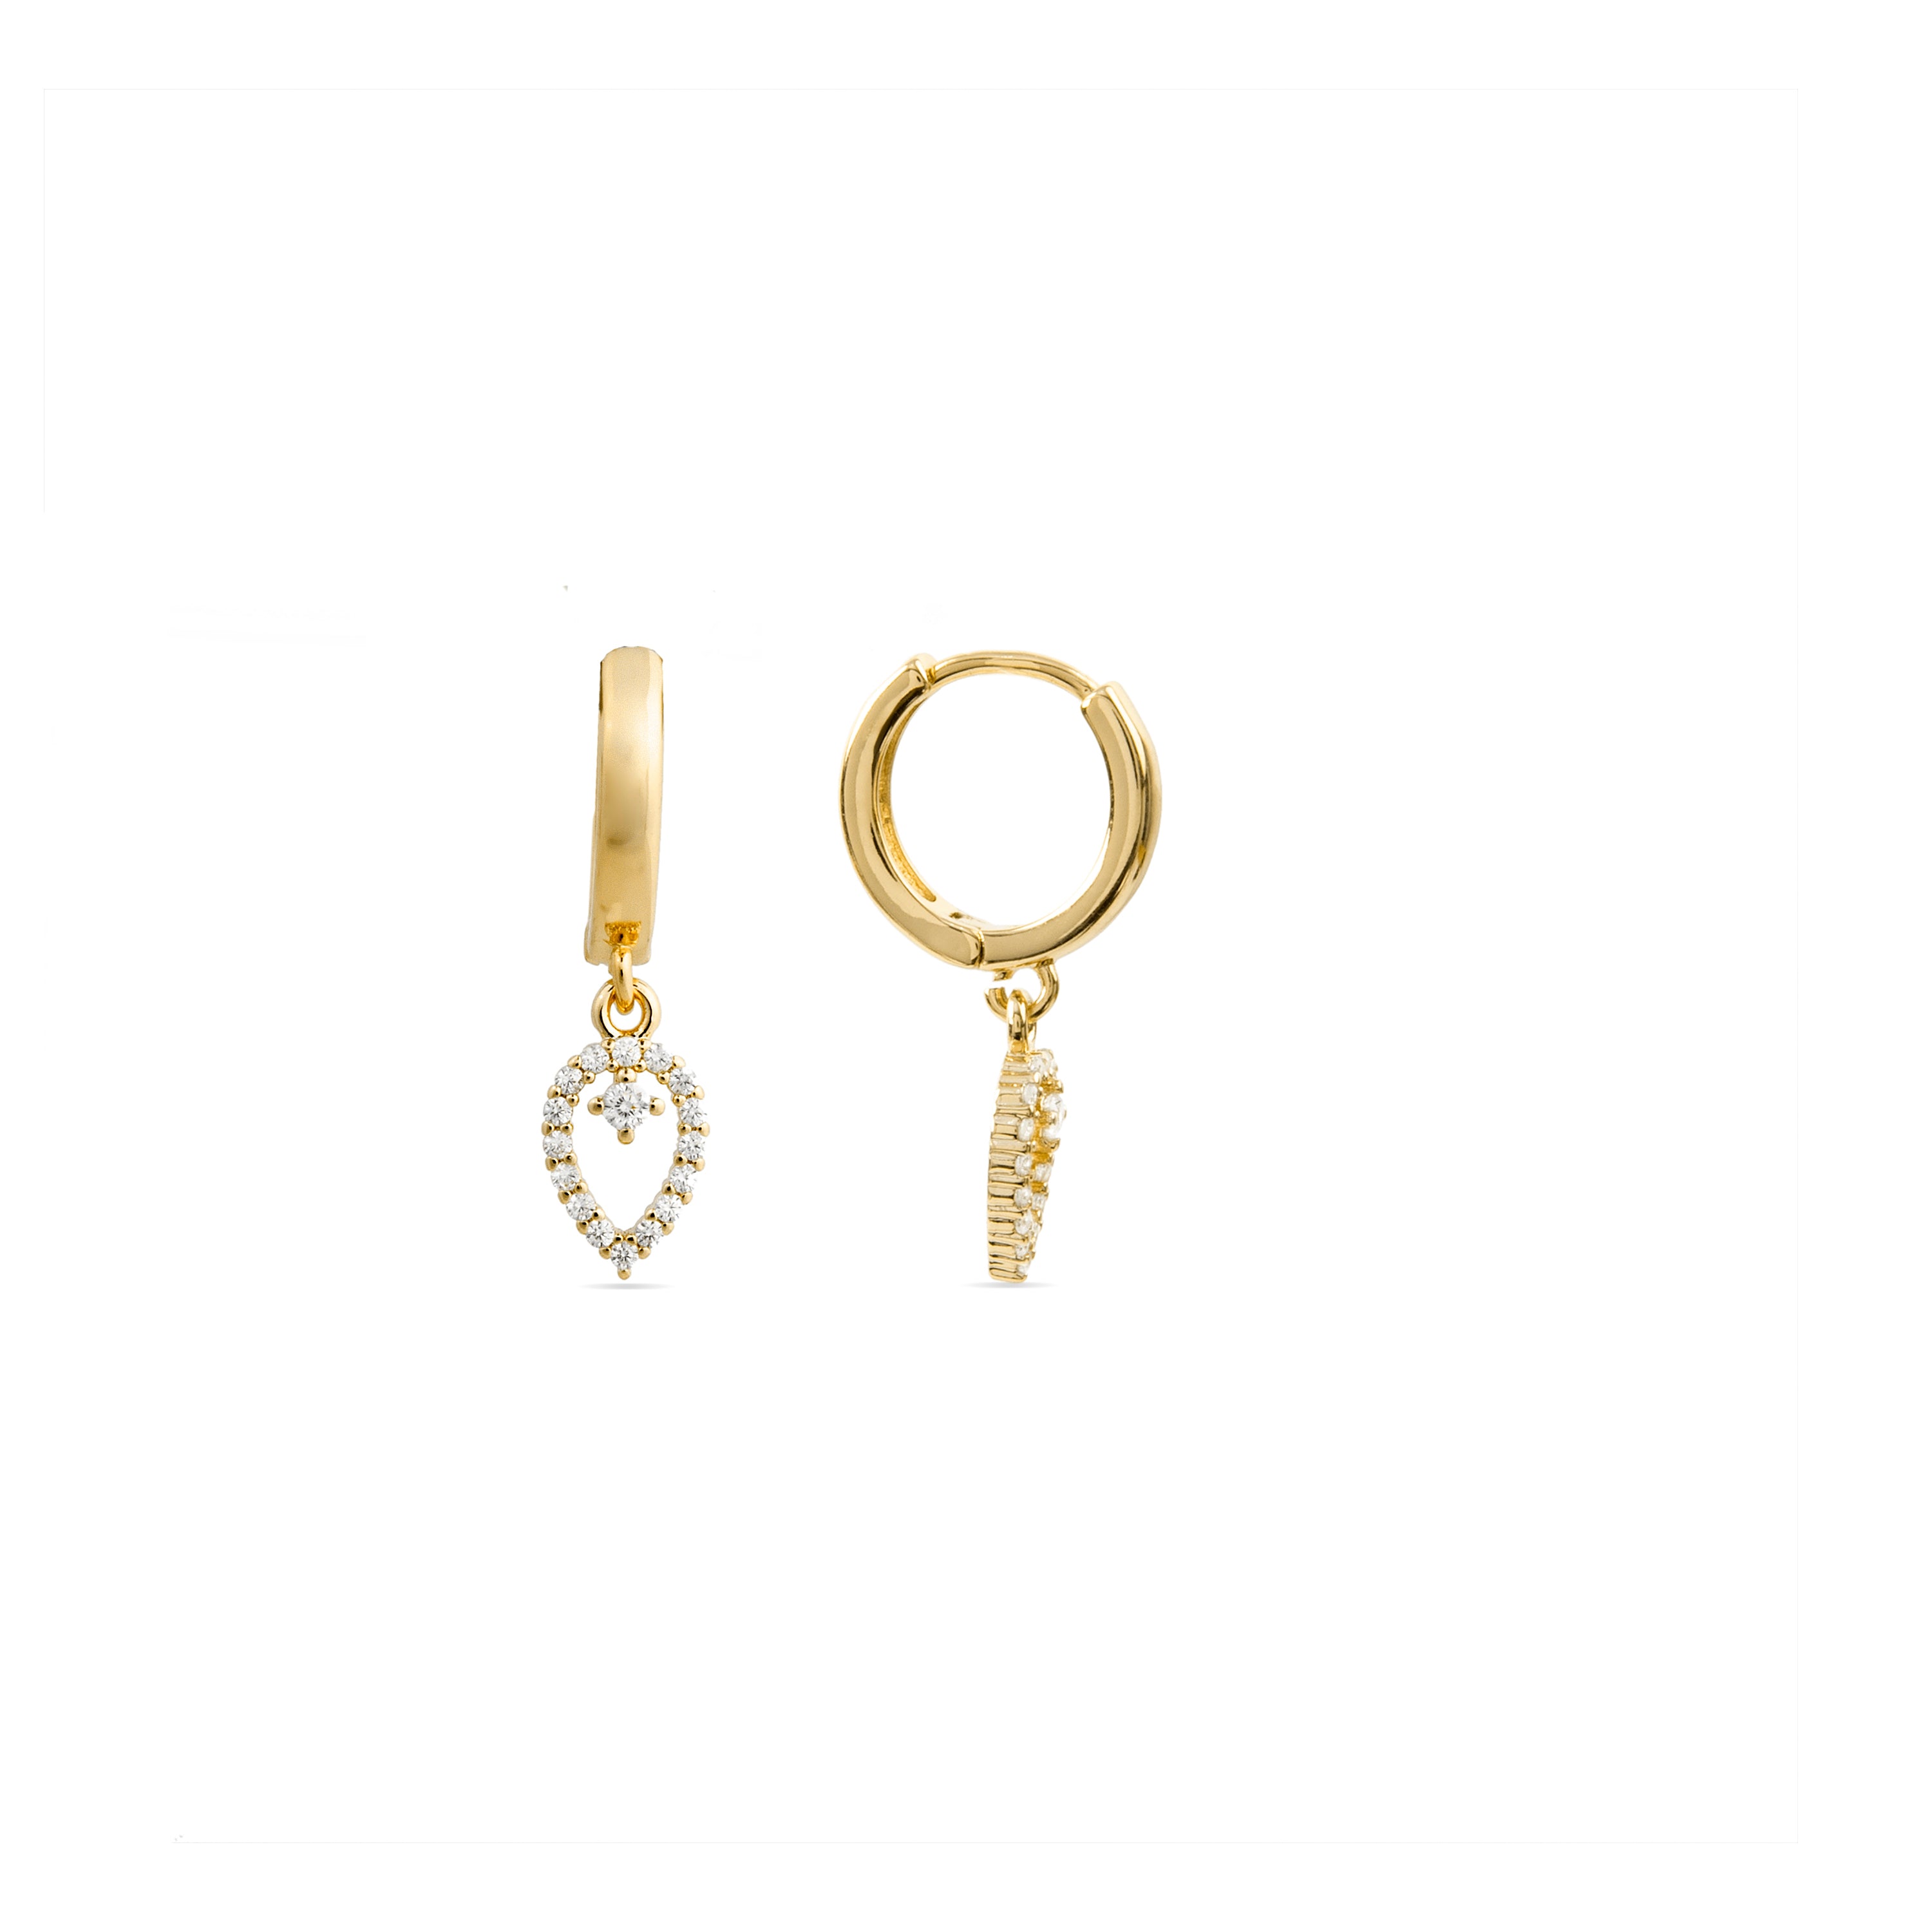 Sarath earrings finished in 18k gold